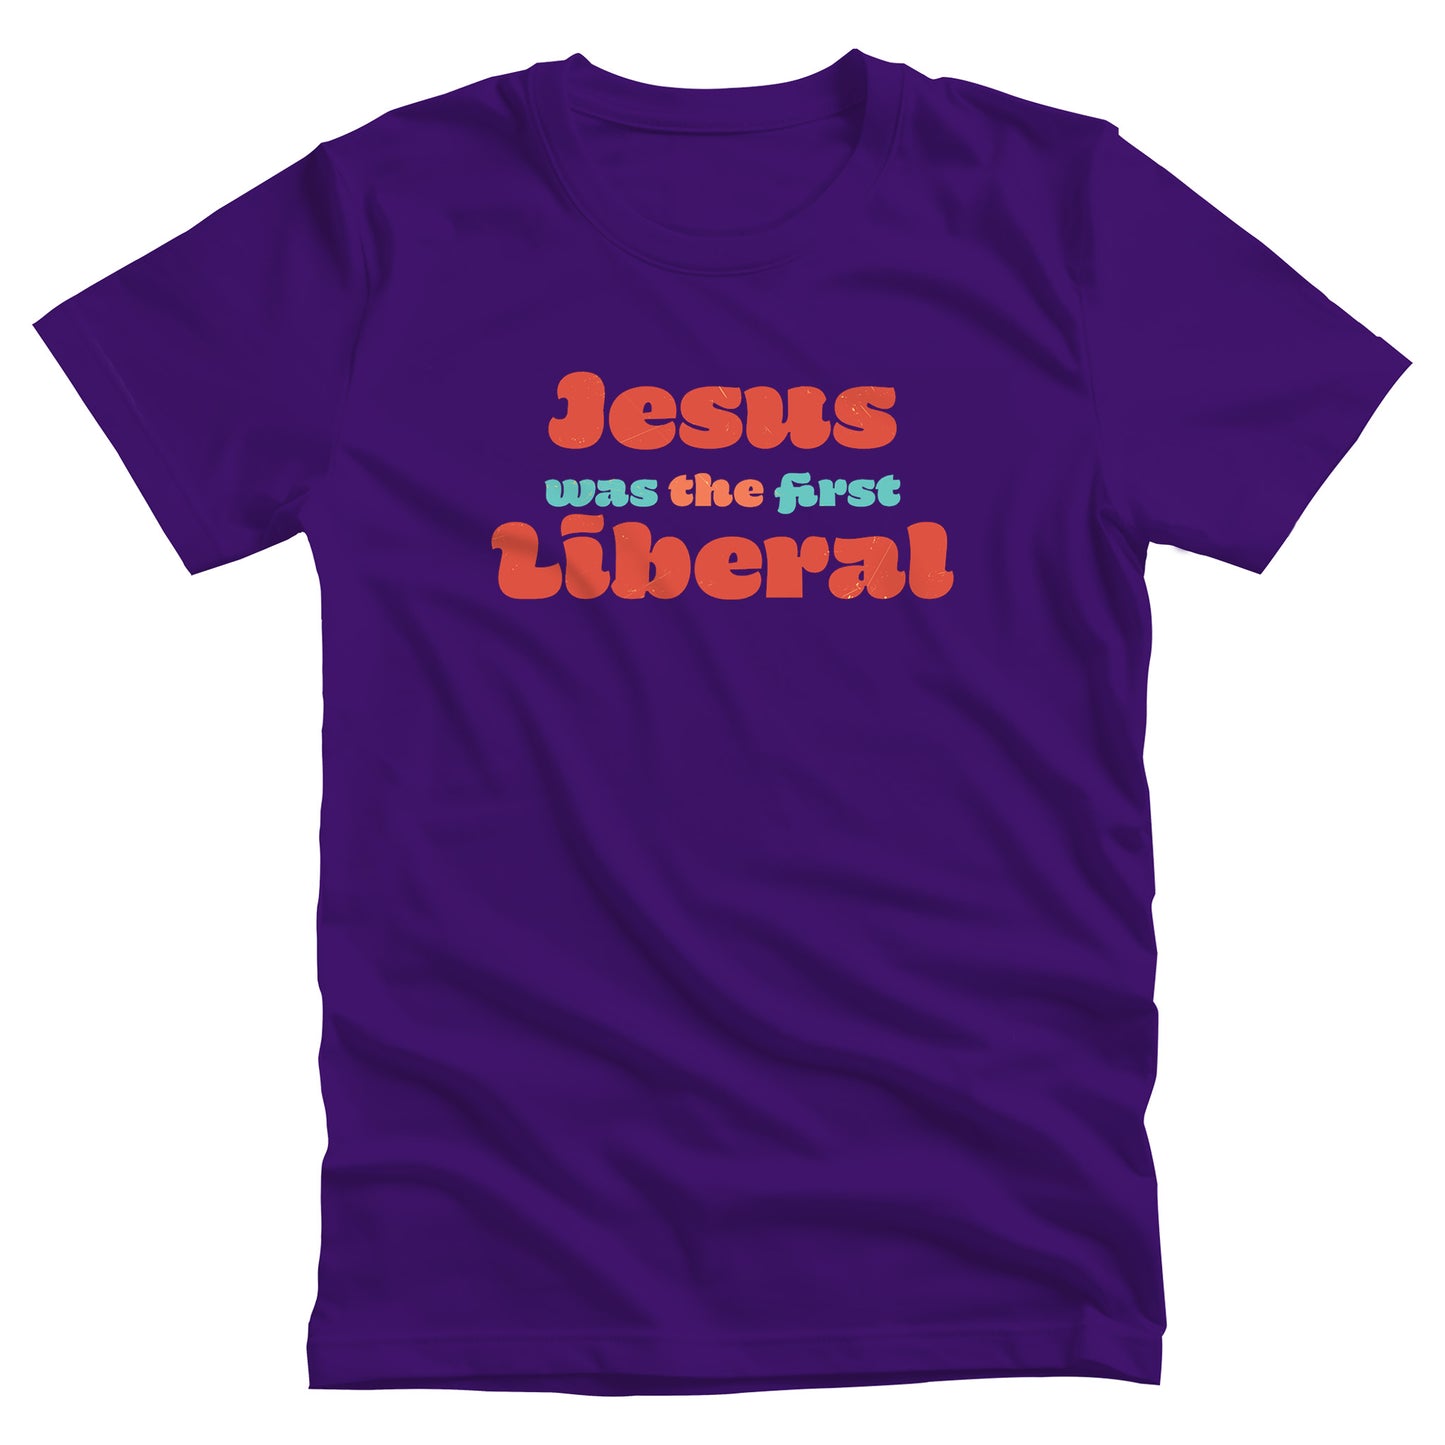 Team Purple color unisex t-shirt that says, “Jesus was the first Liberal.” The words “Jesus”, “the”, and “Liberal” are all a shade of orange, and the words “Was” and “First” are a light blue-green.